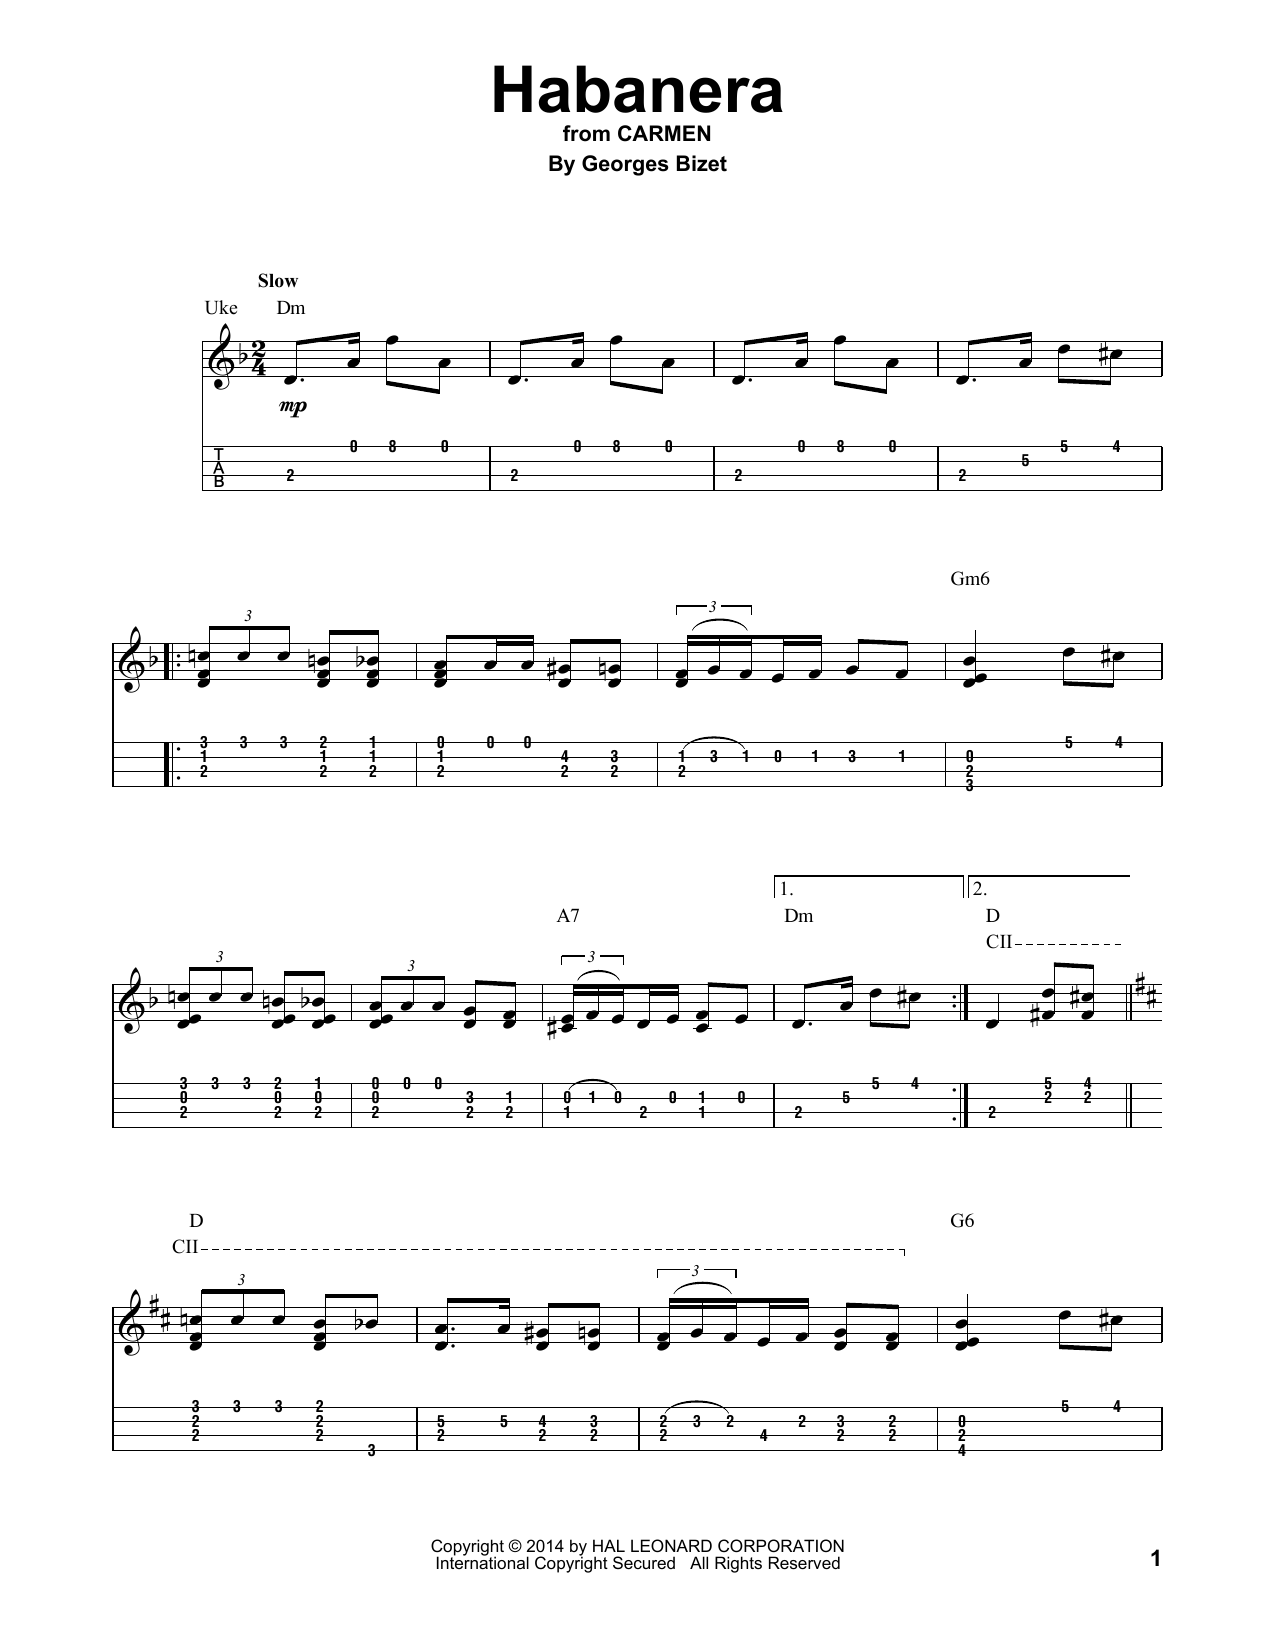 Georges Bizet Habanera sheet music notes and chords. Download Printable PDF.